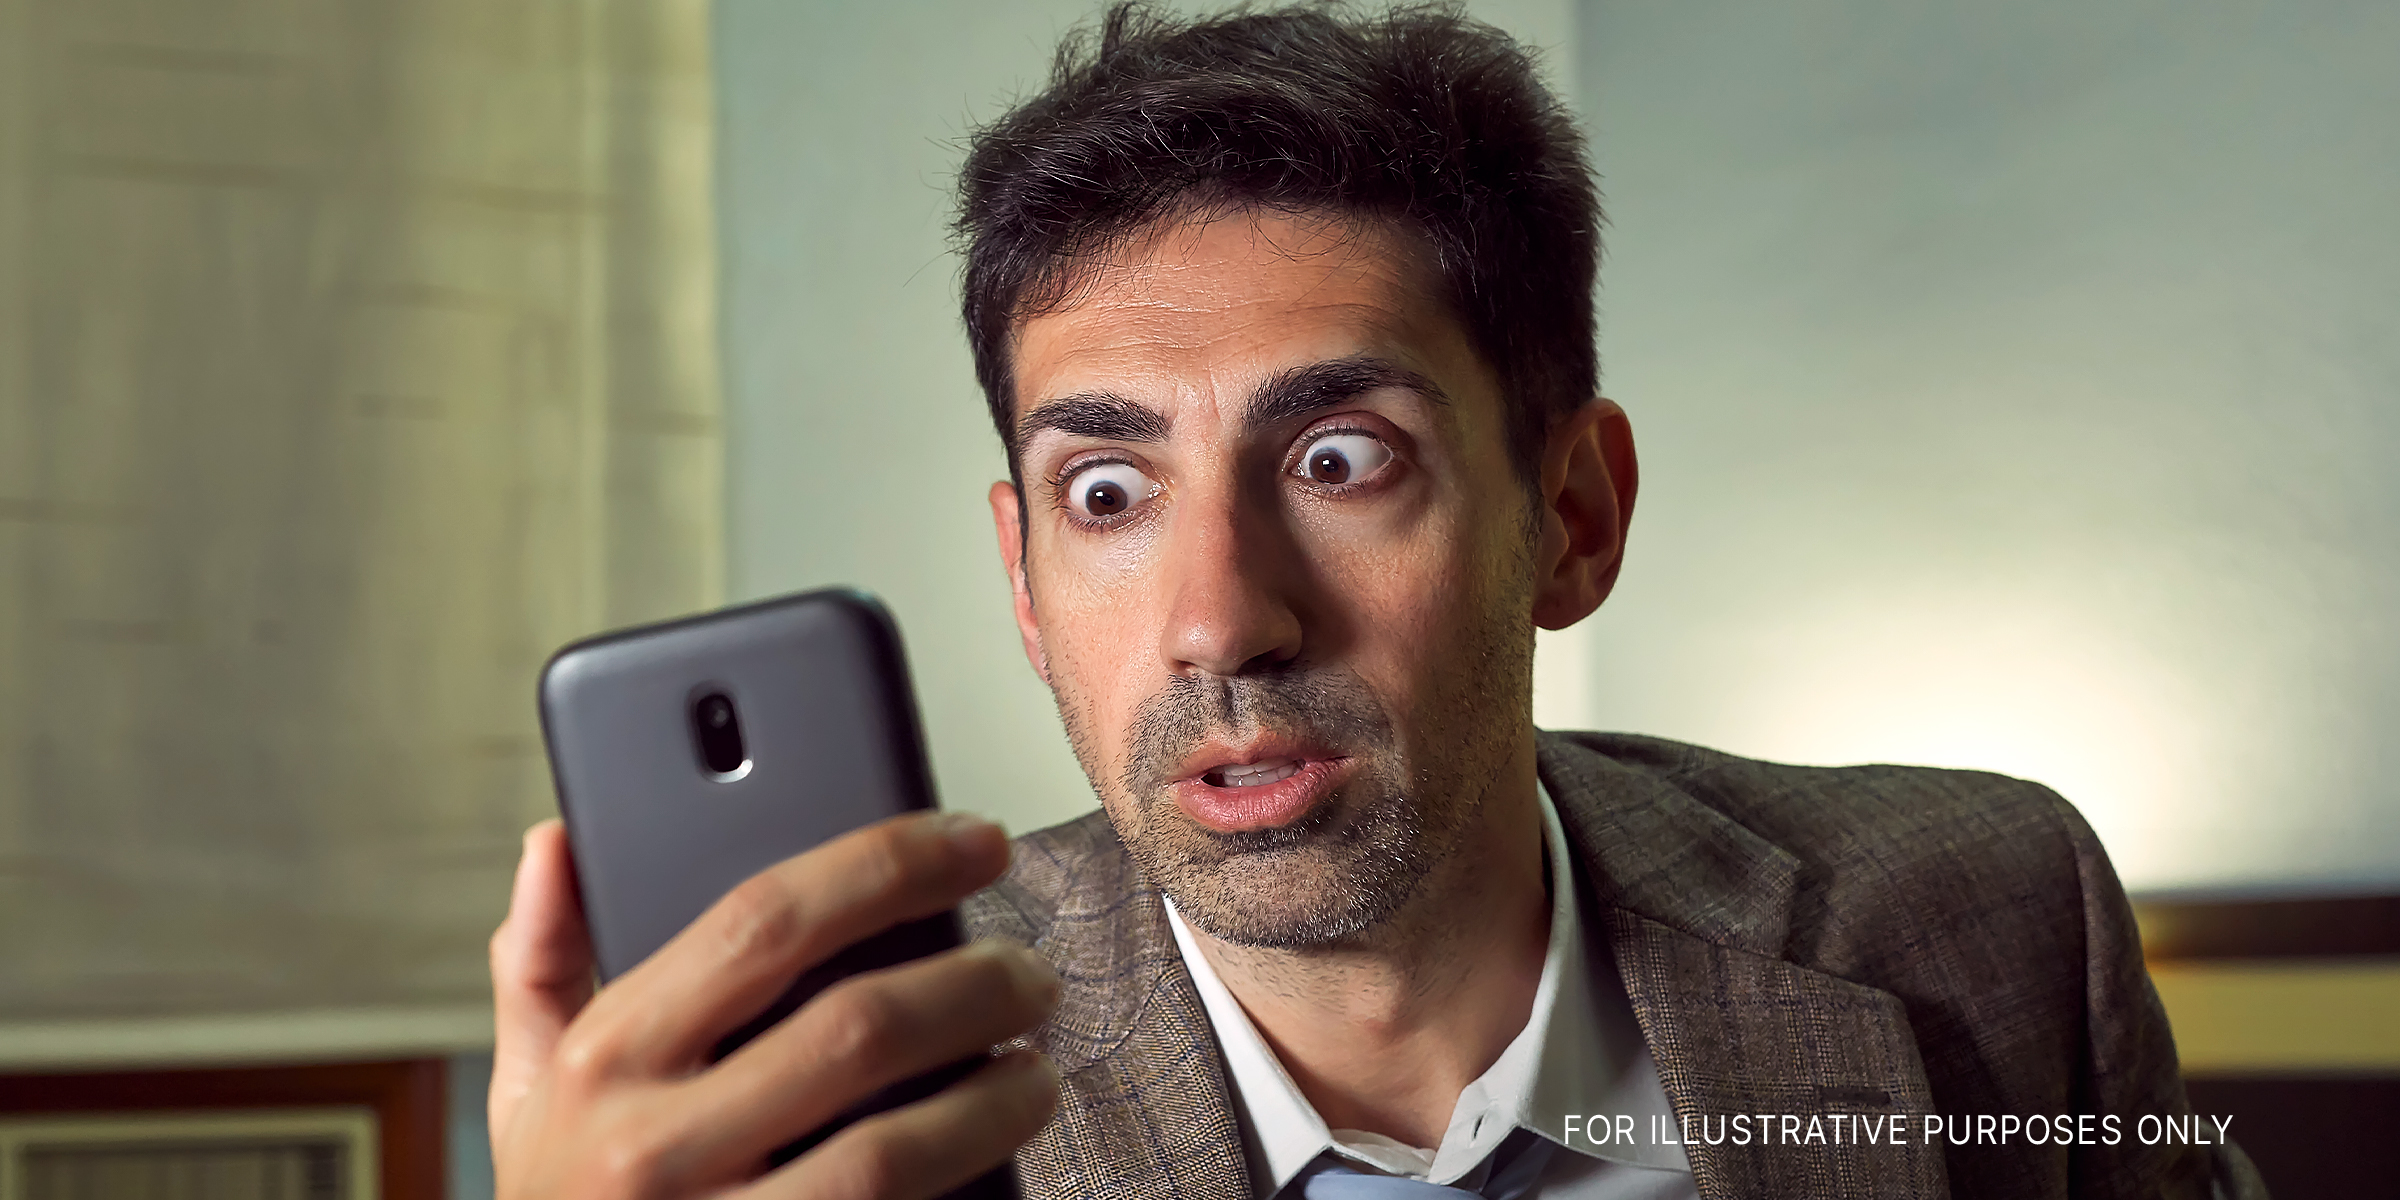 A man looking at his phone with wide eyes | Source: Shutterstock